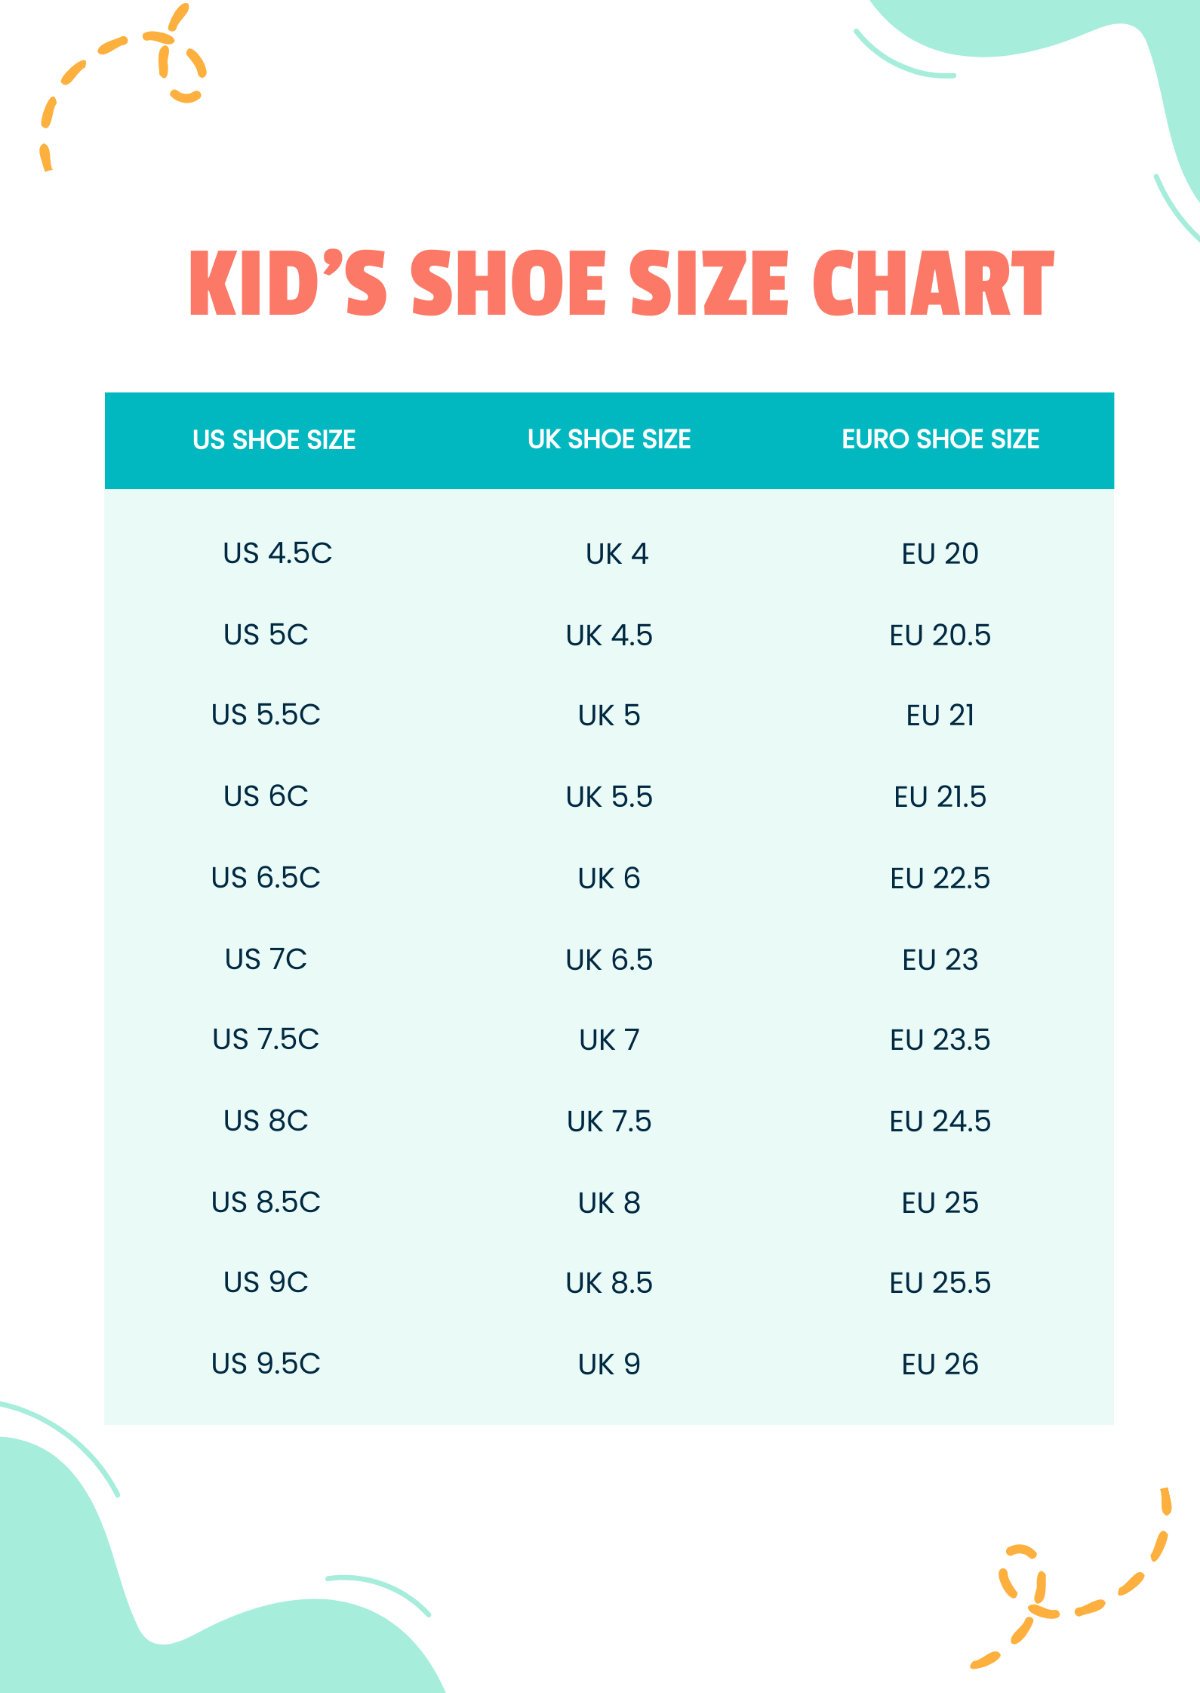 FREE Shoe Chart Template - Download in Word, PDF, Illustrator ...